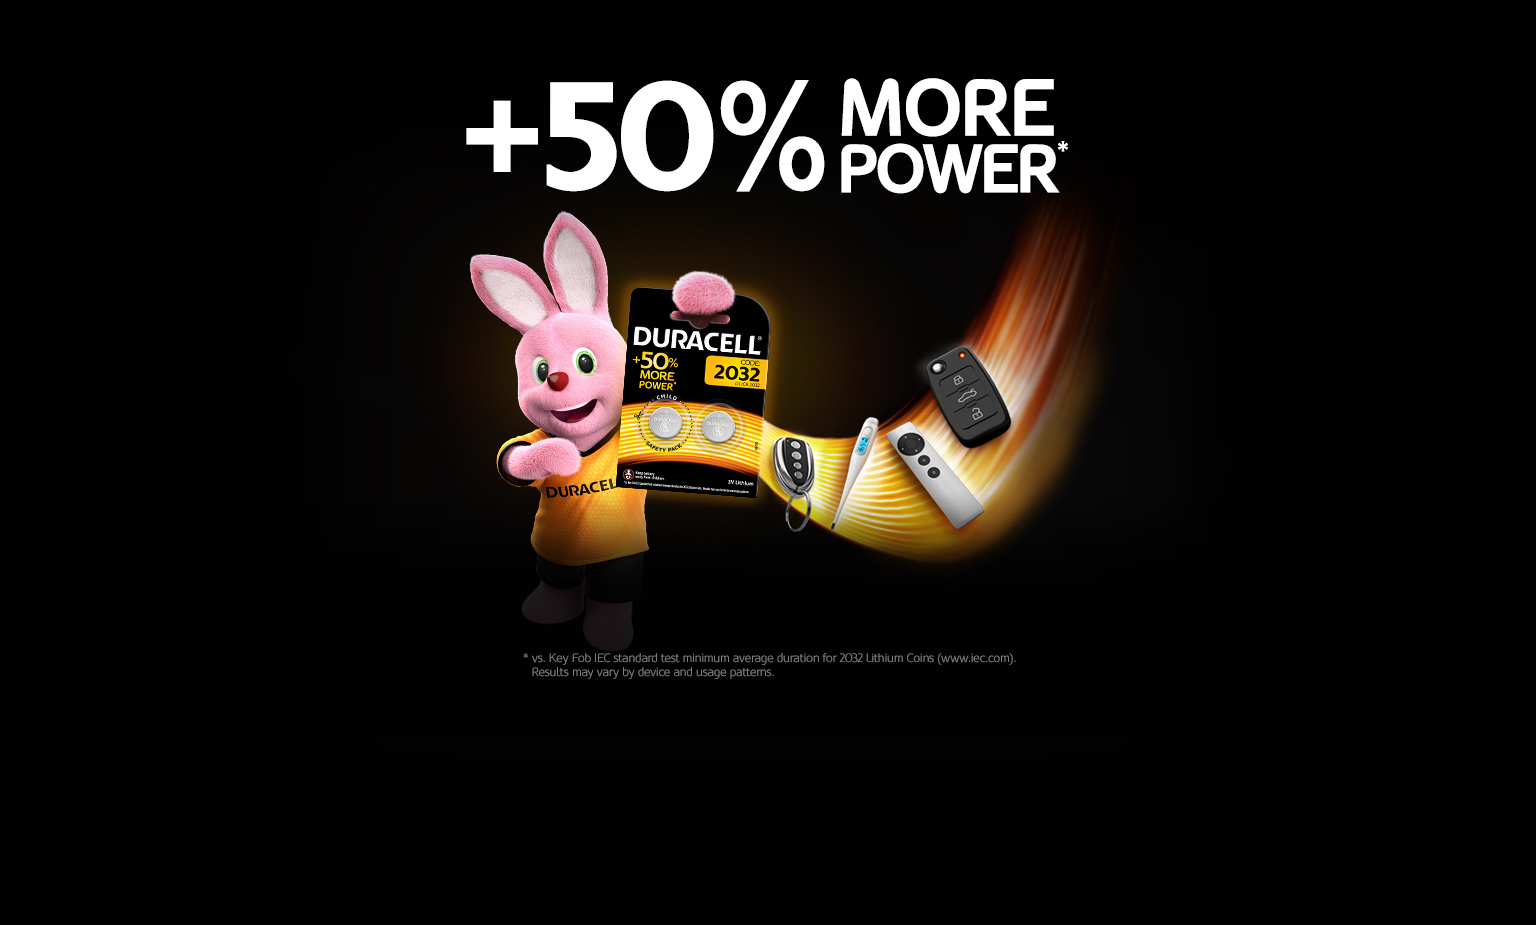 Duracell Coin batteries 2032 with 50% more power.